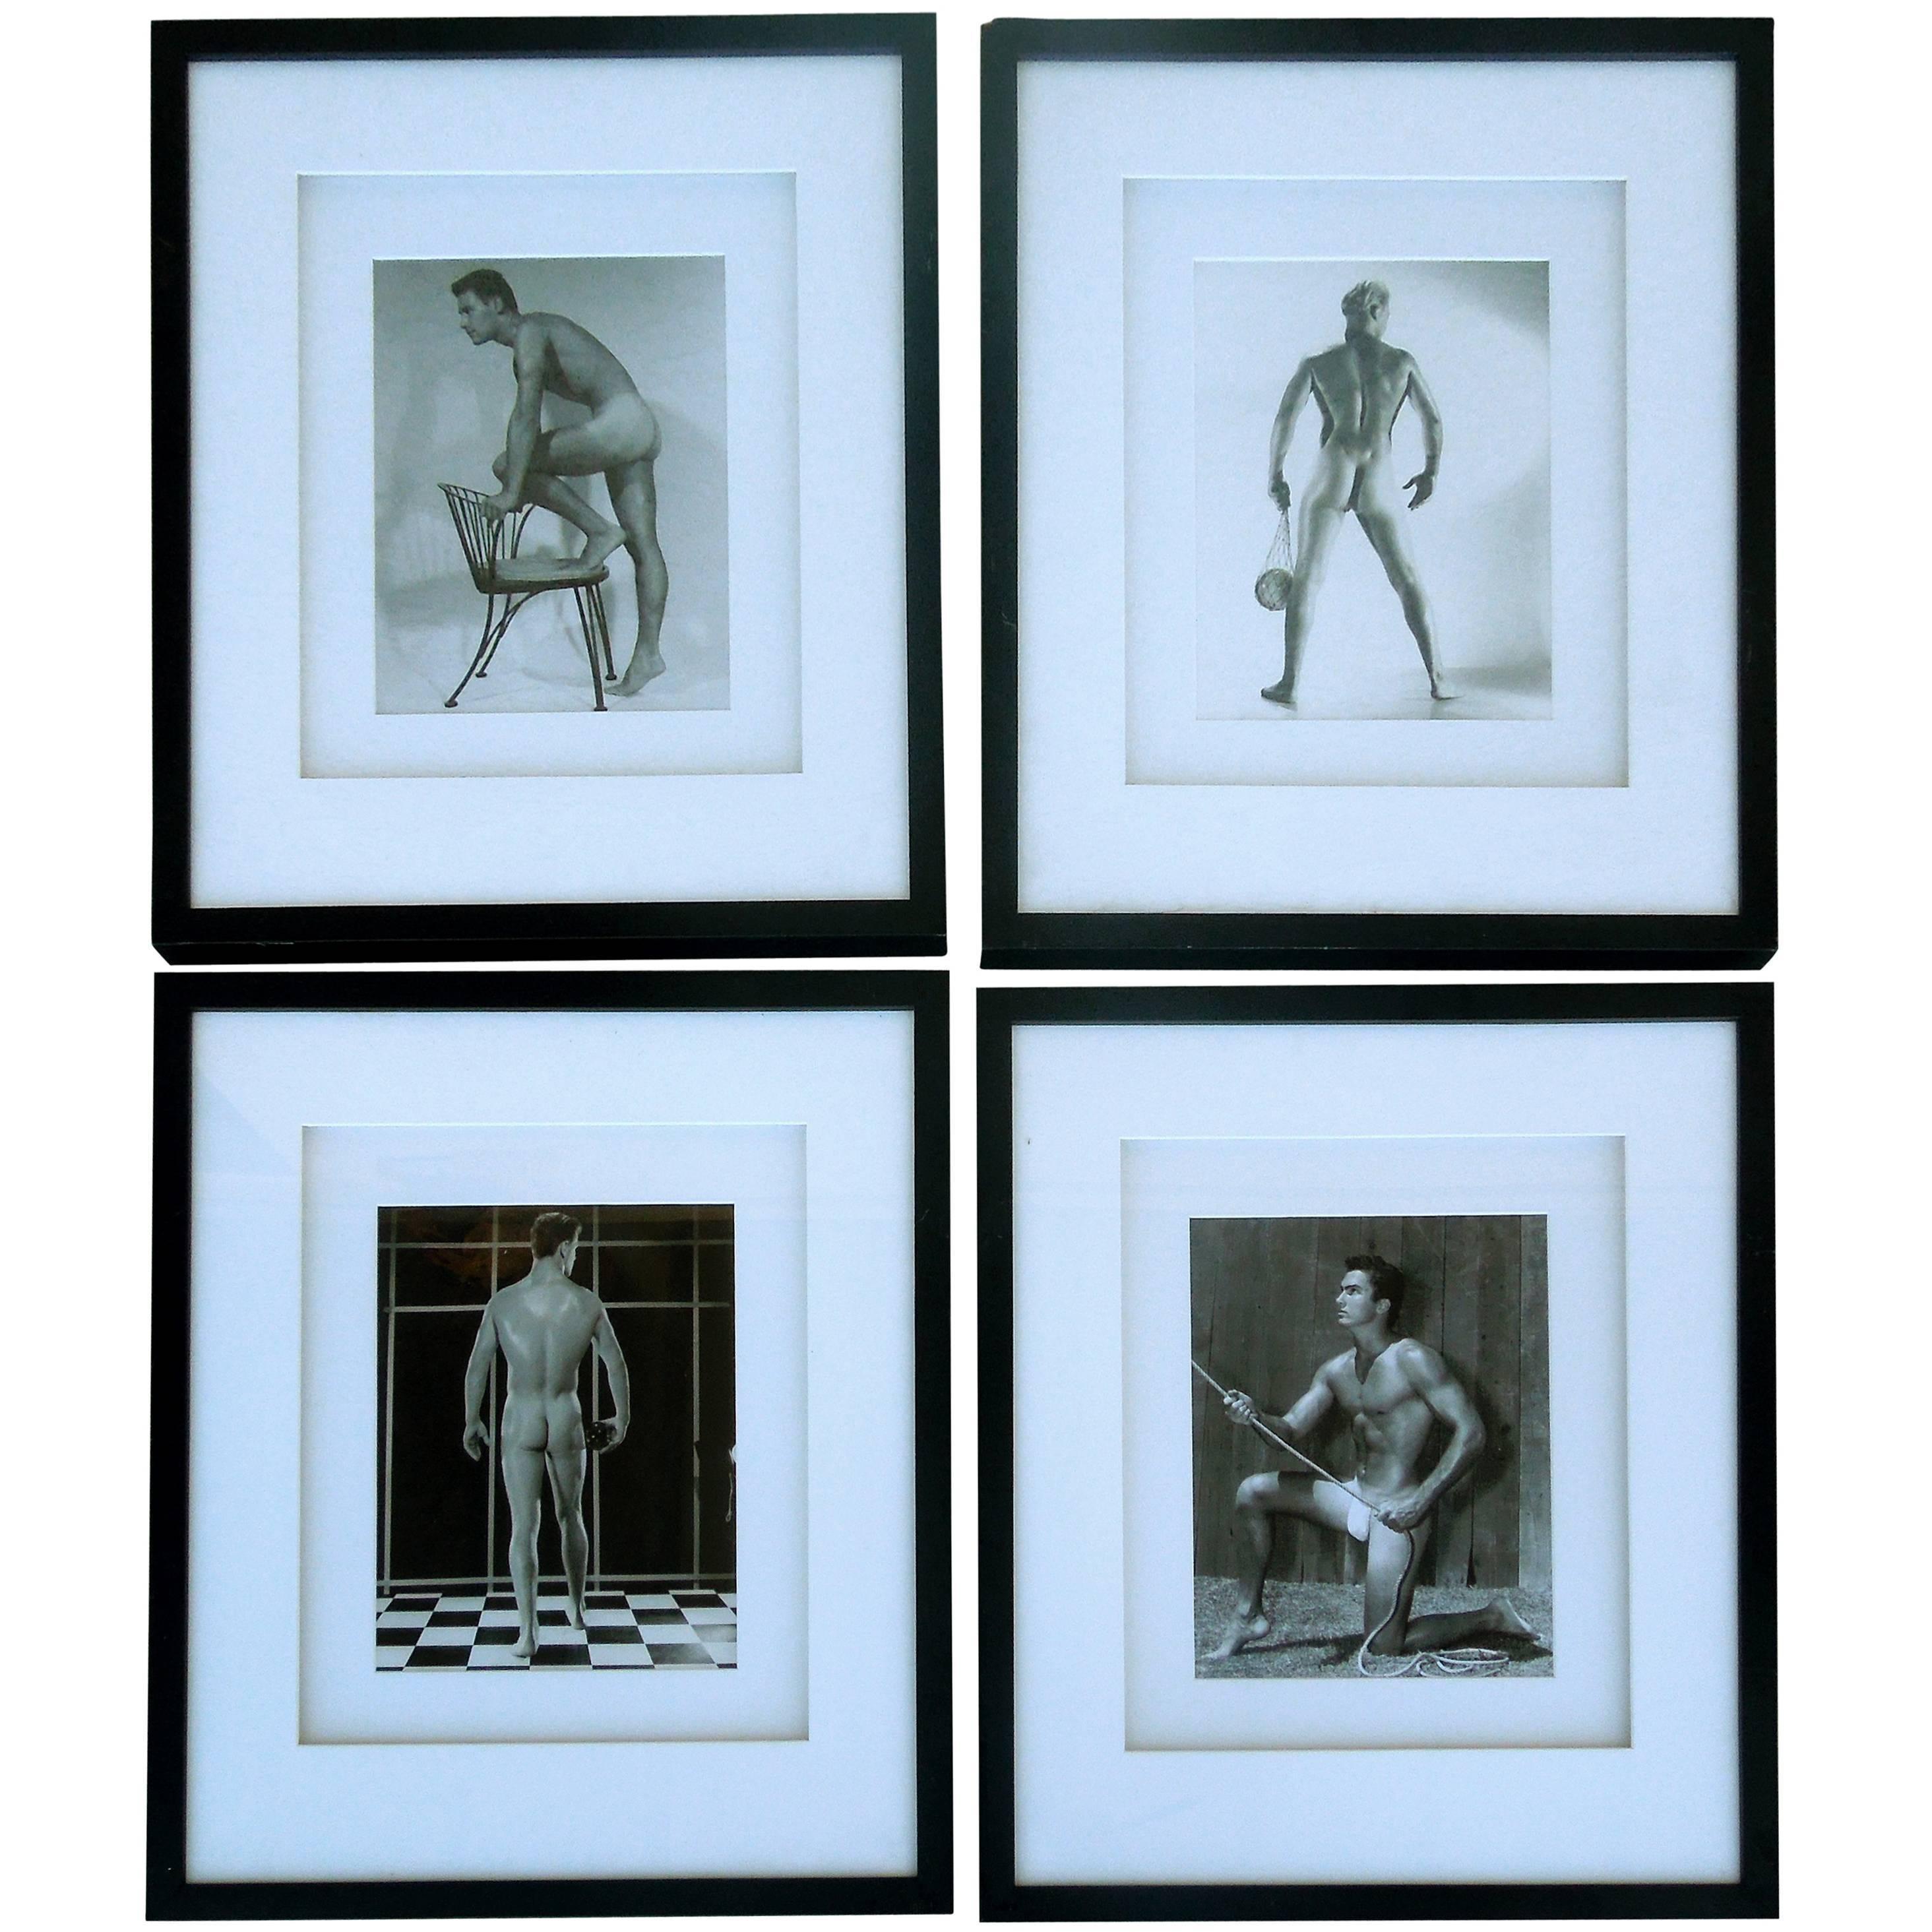 Bruce of L.A.Original 1950s Male Physique Photograph Model Handsome Bill Gregory For Sale 2